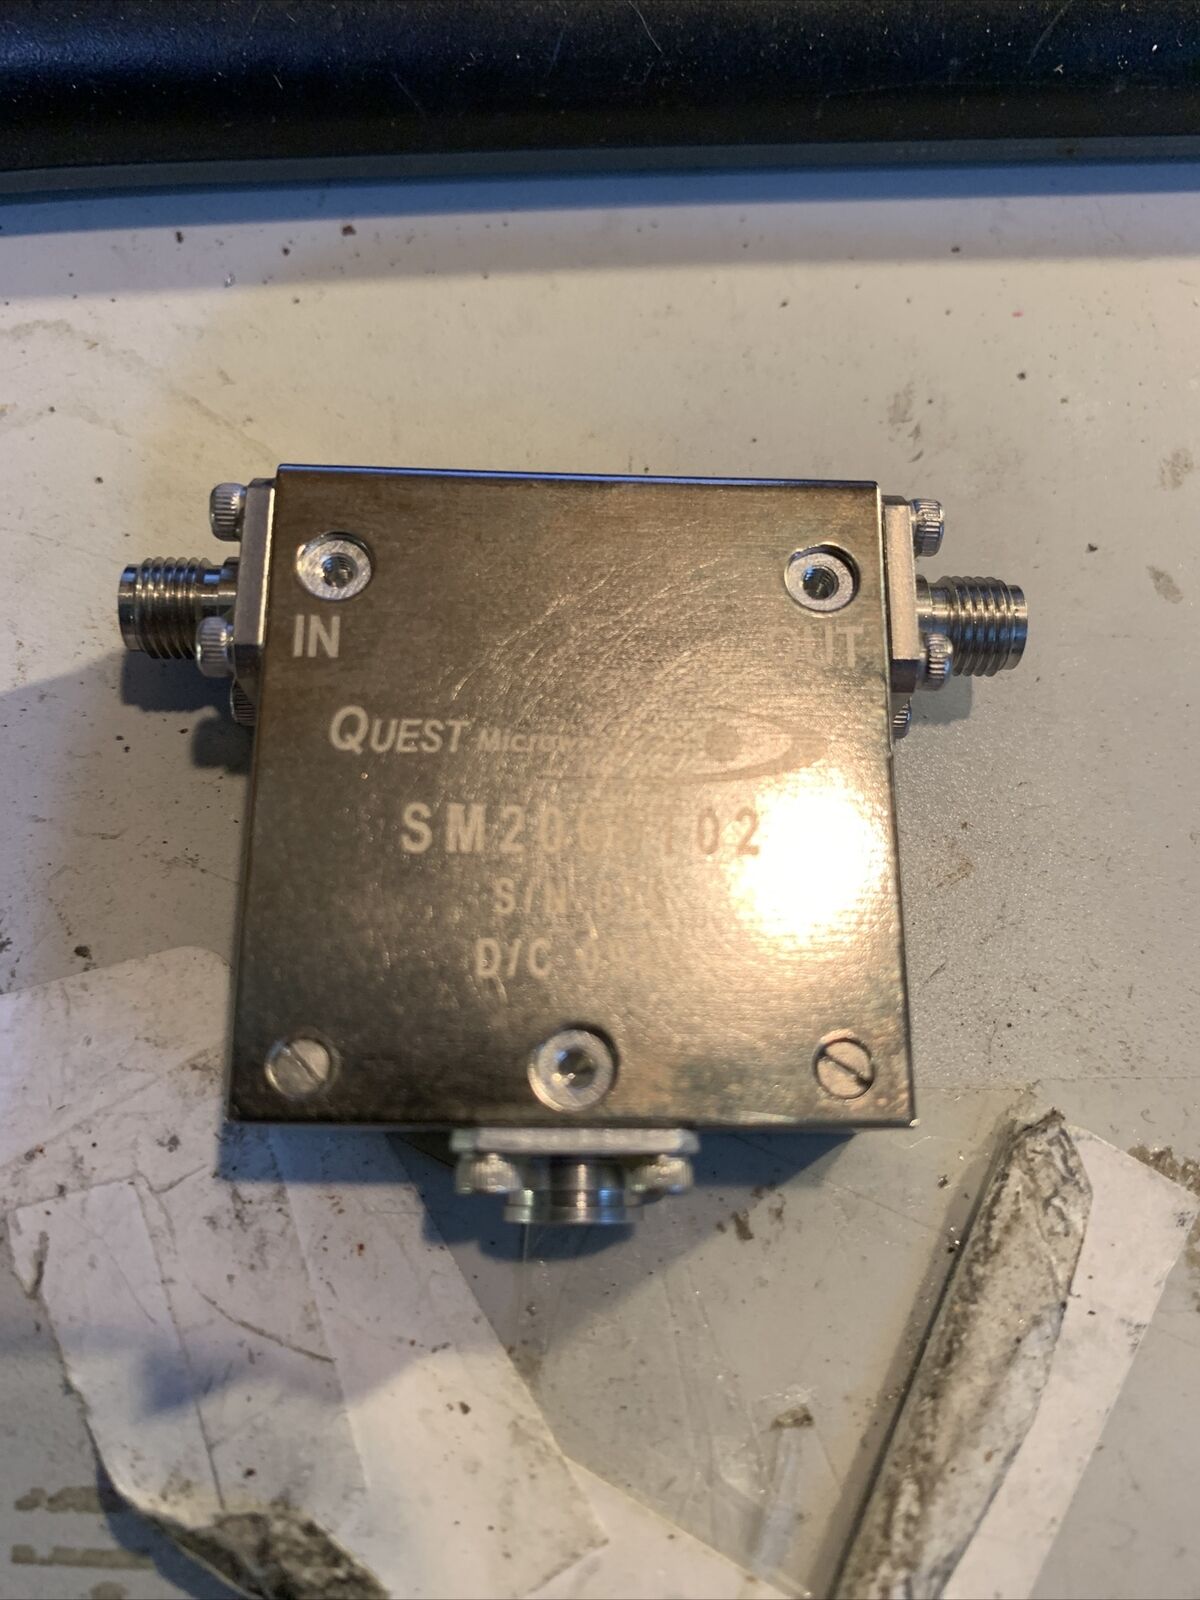 Quest Microwave SM2060T02: Microwave Isolator.  2 - 6GHz 75W 0.4dB Loss